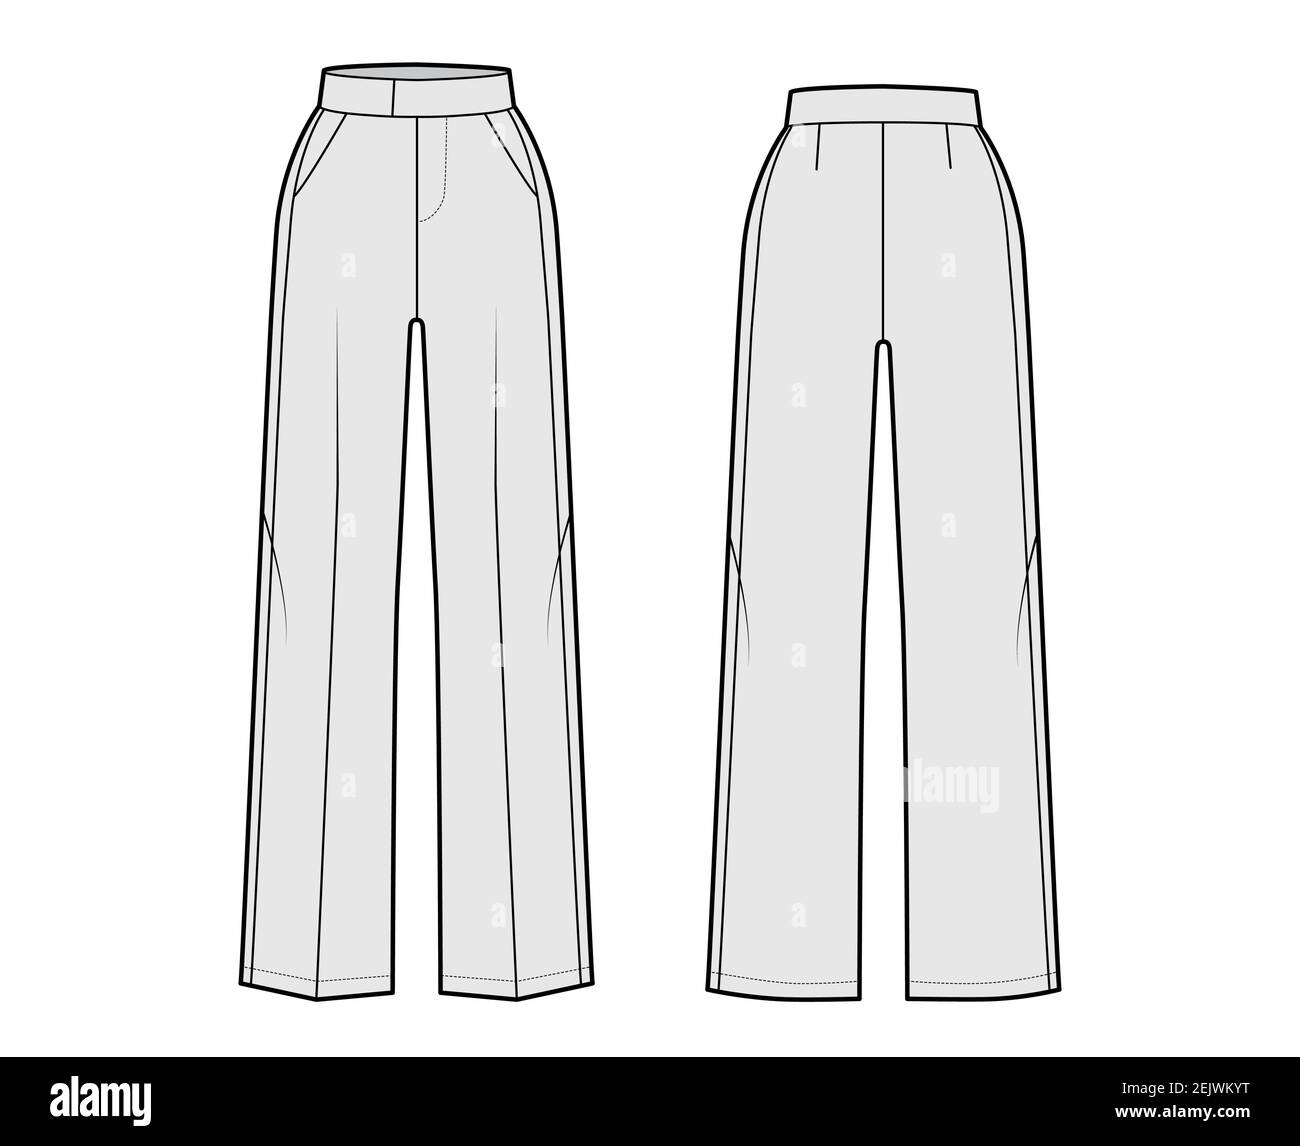 Pants tuxedo technical fashion illustration with extended normal waist, high rise, full length, slant pockets, side satin stripe. Flat trousers bottom template back, grey color. Women, men CAD mockup Stock Vector